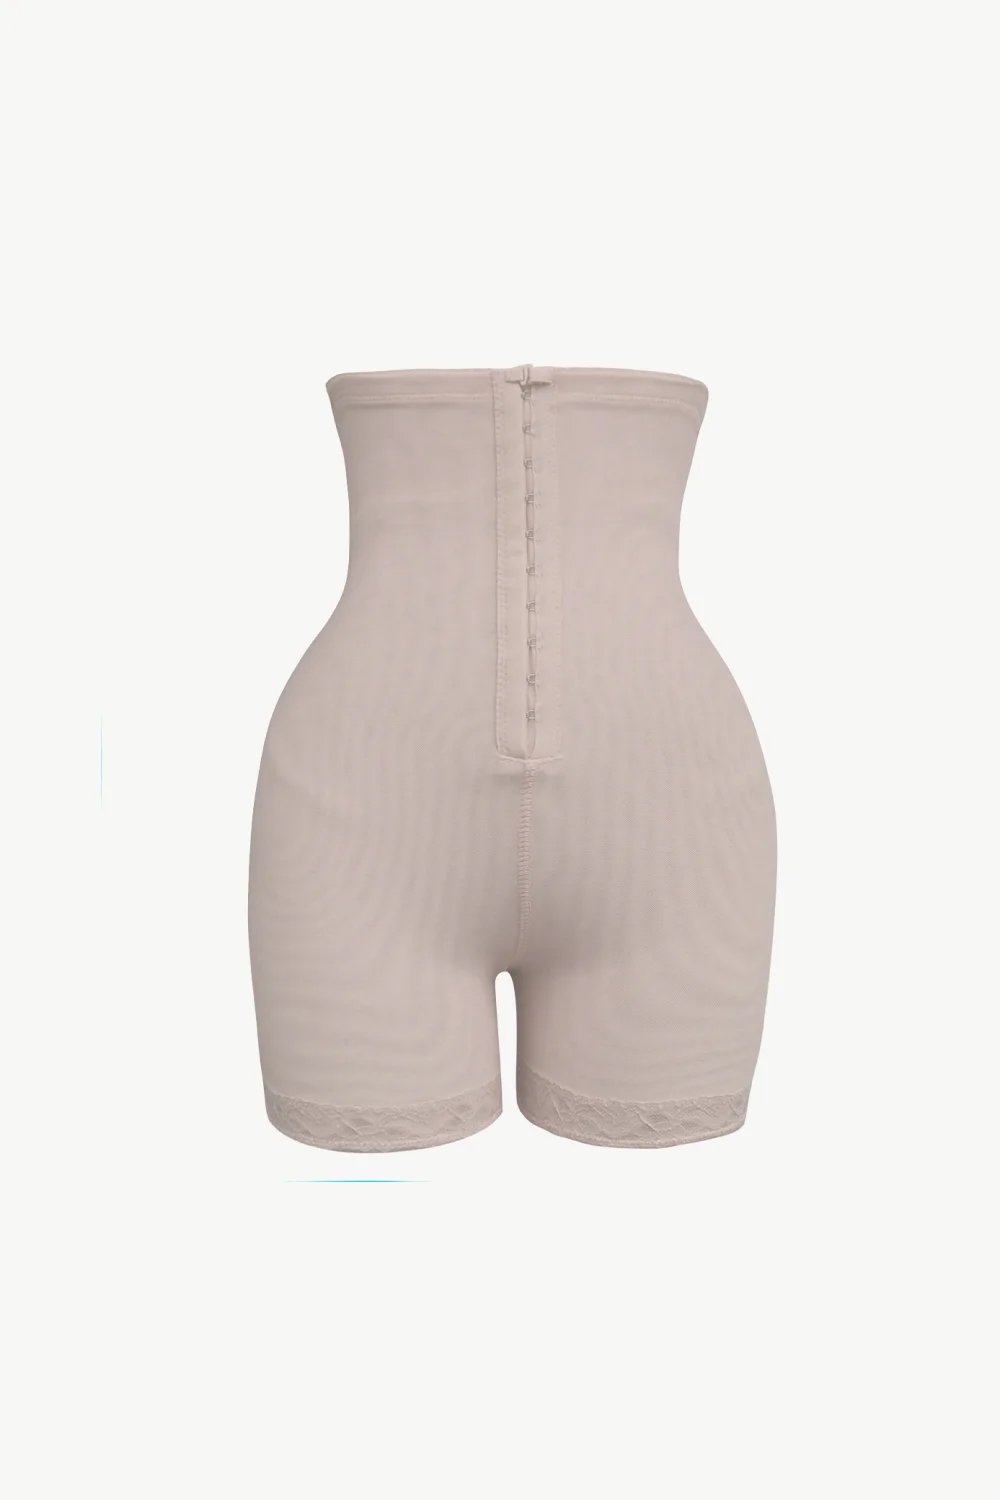 Fajas Post Surgical Body Suit